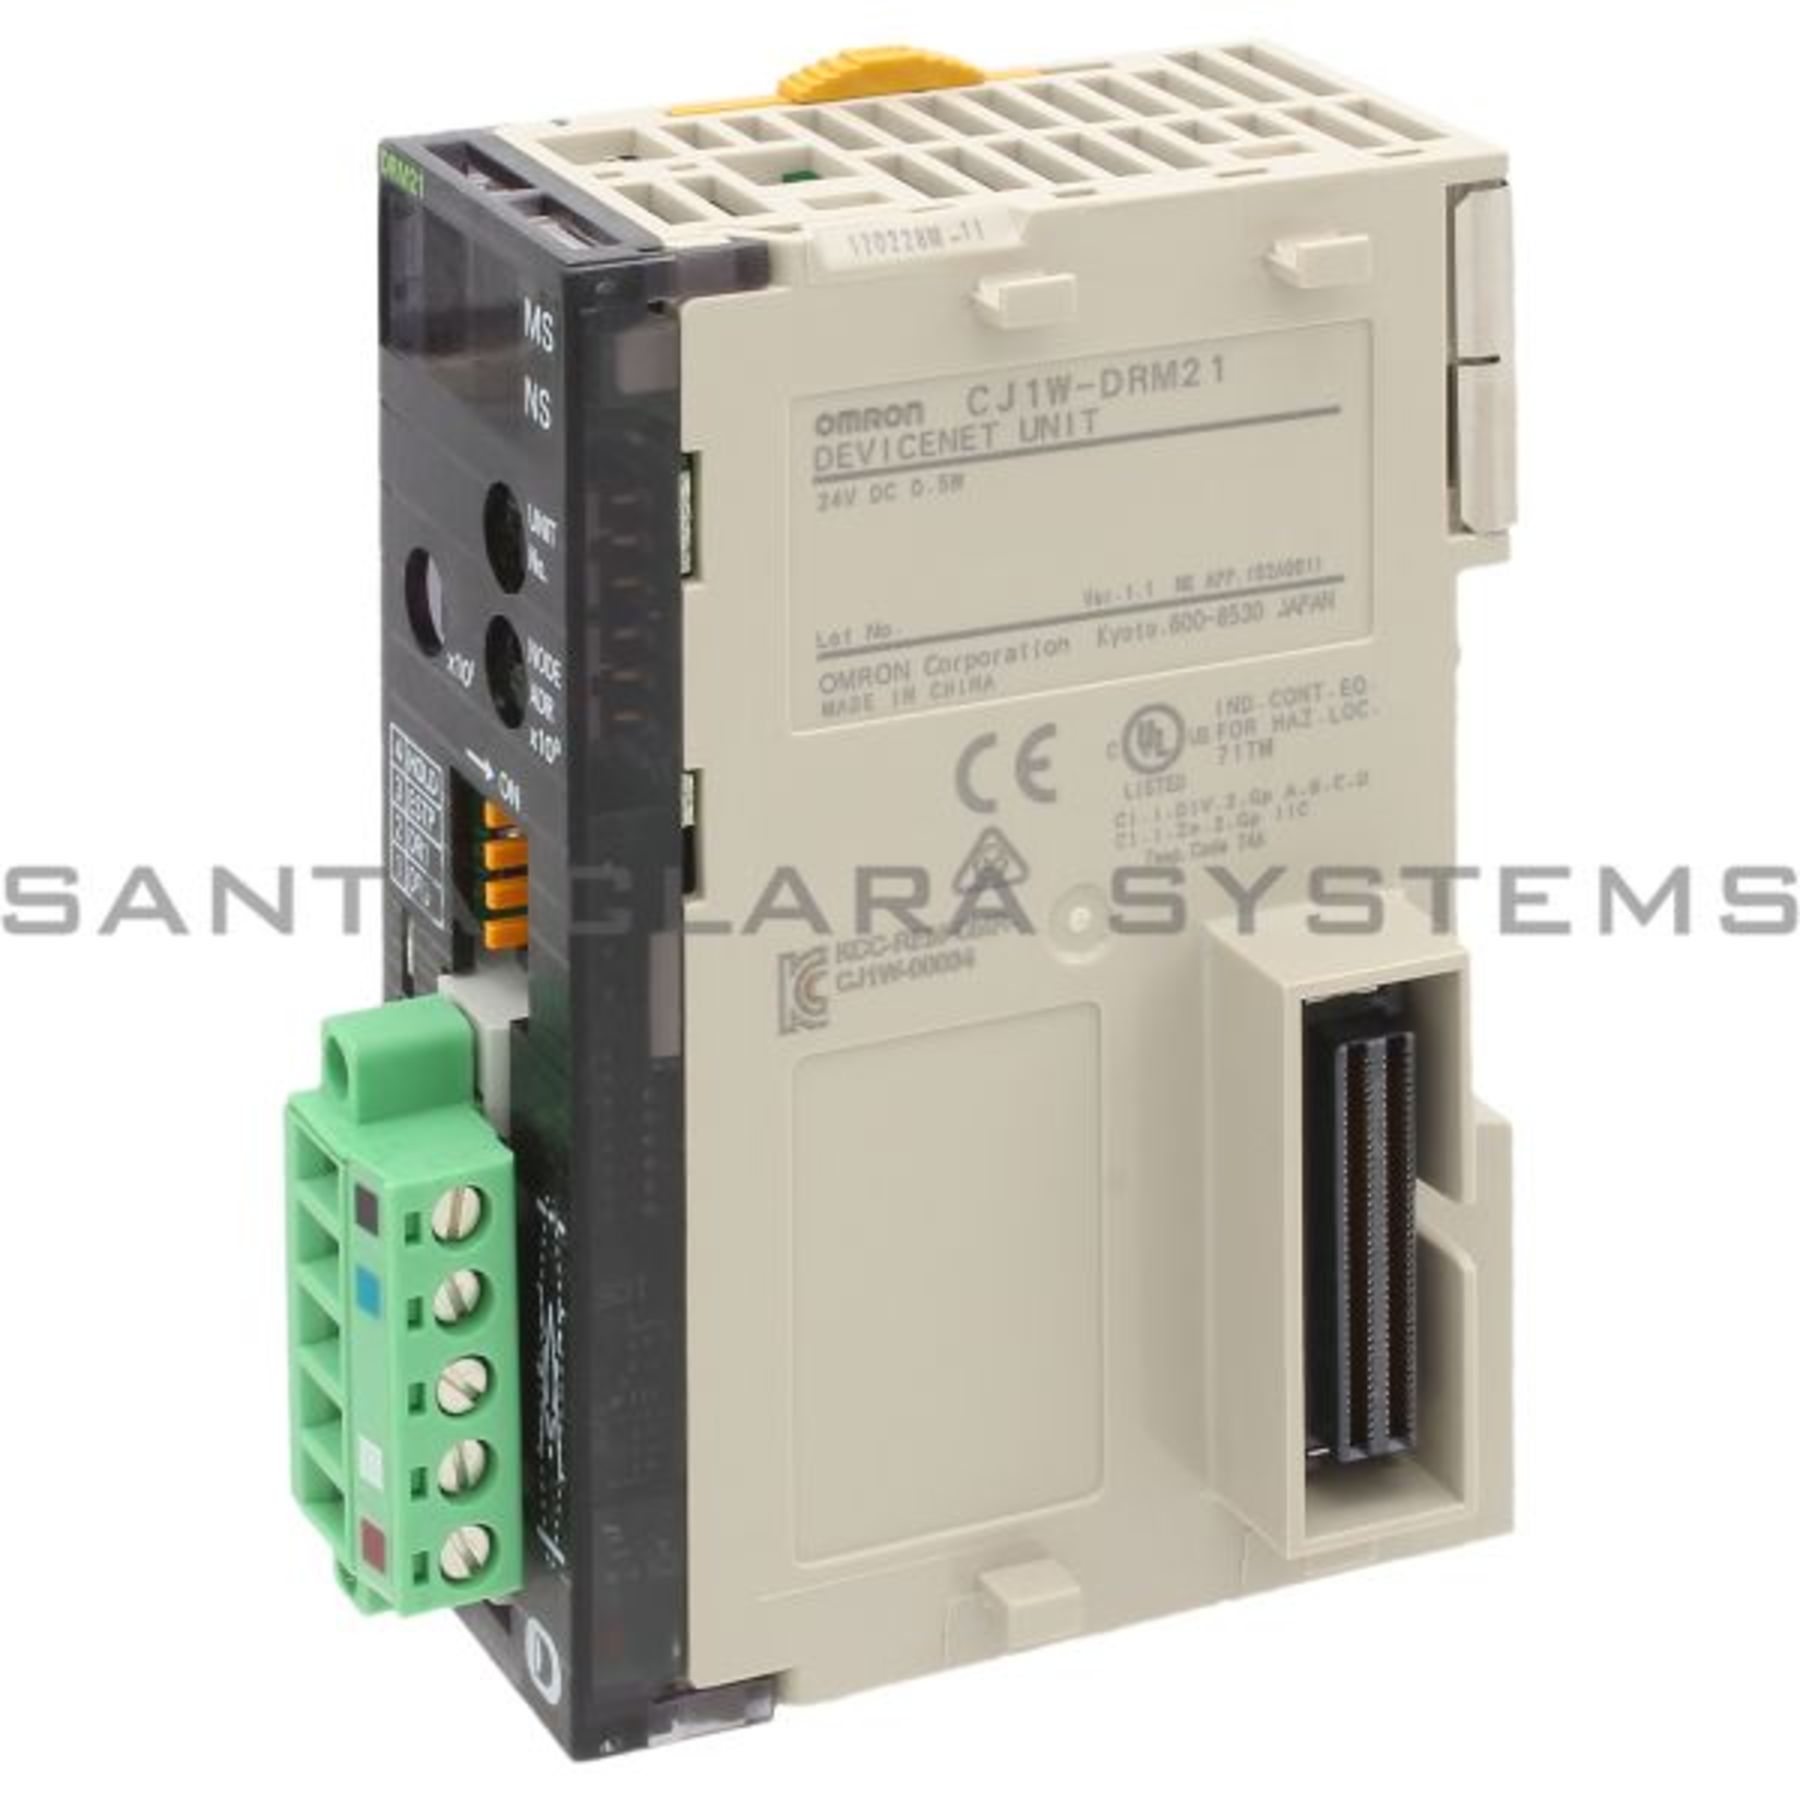 CJ1W-DRM21 Omron In stock and ready to ship - Santa Clara Systems